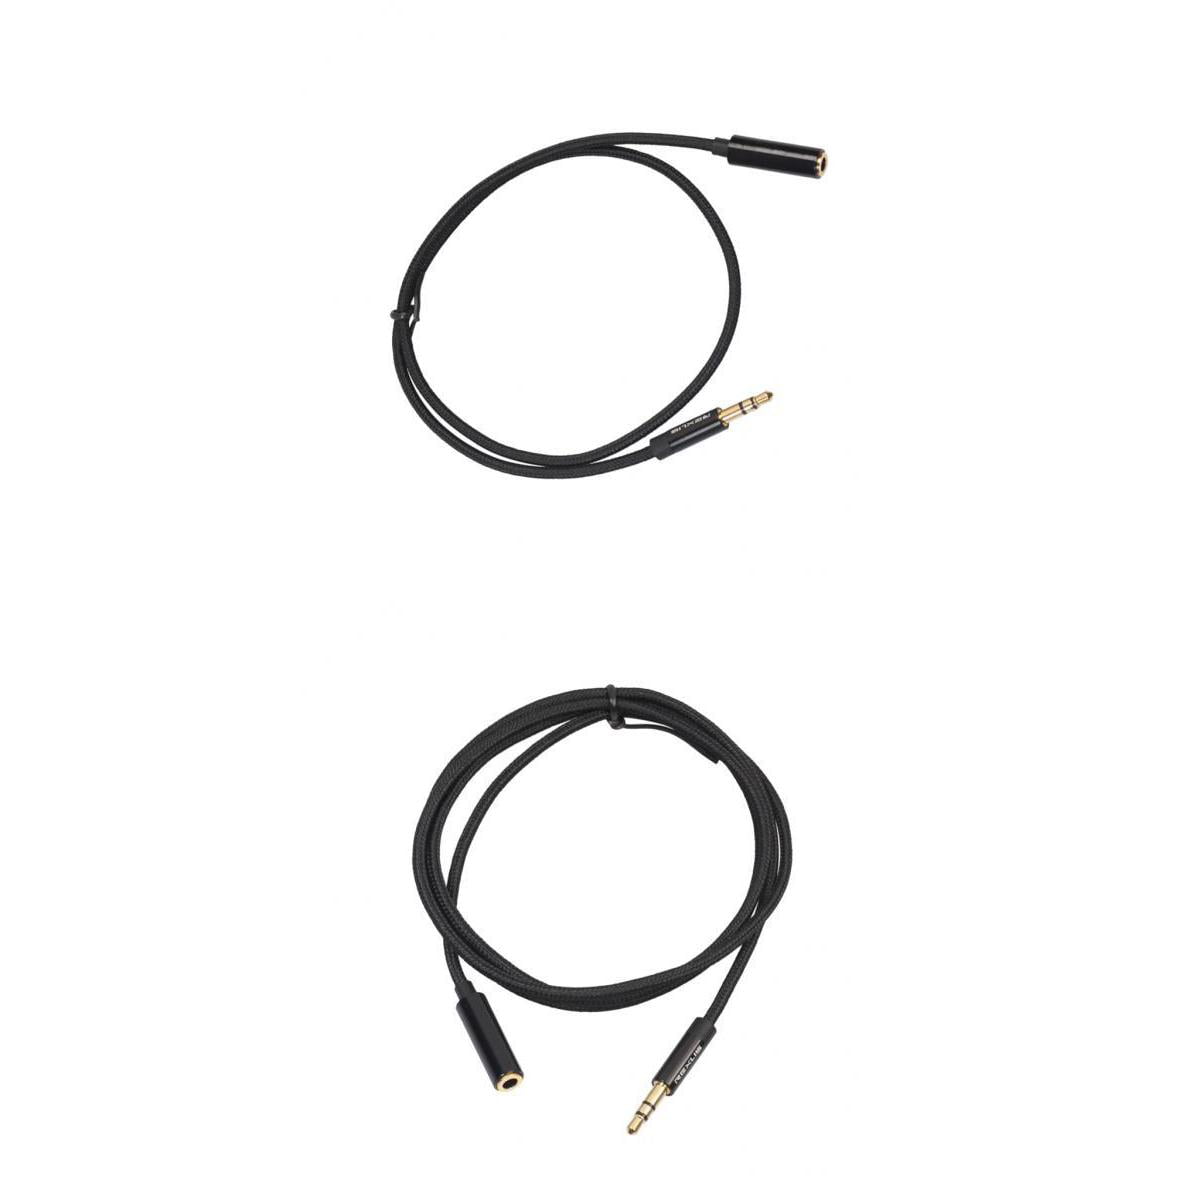 2x 3.5mm Stereo Audio Headphone Cable Extension Cord Male to 